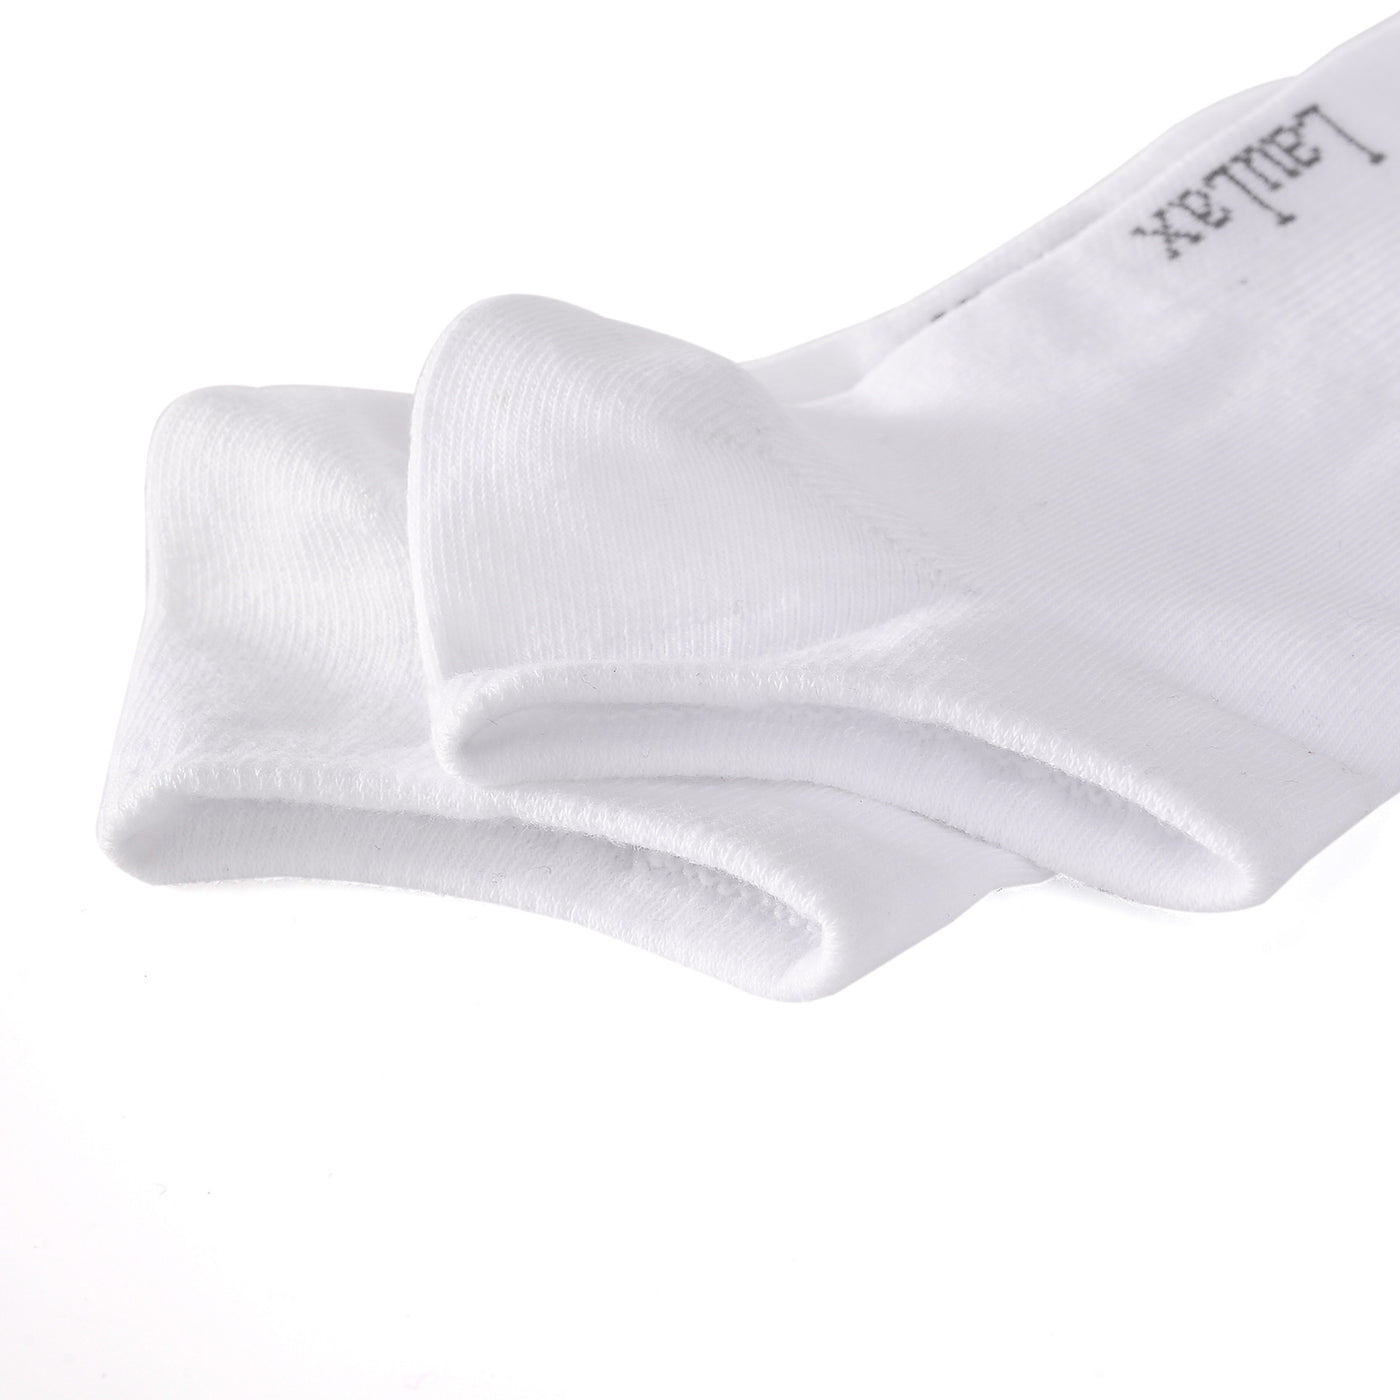 Laulax 6 Pairs Finest Combed Cotton Arch Support Trainer Socks, White, Size UK 9 - 11 / Europ 43 - 46